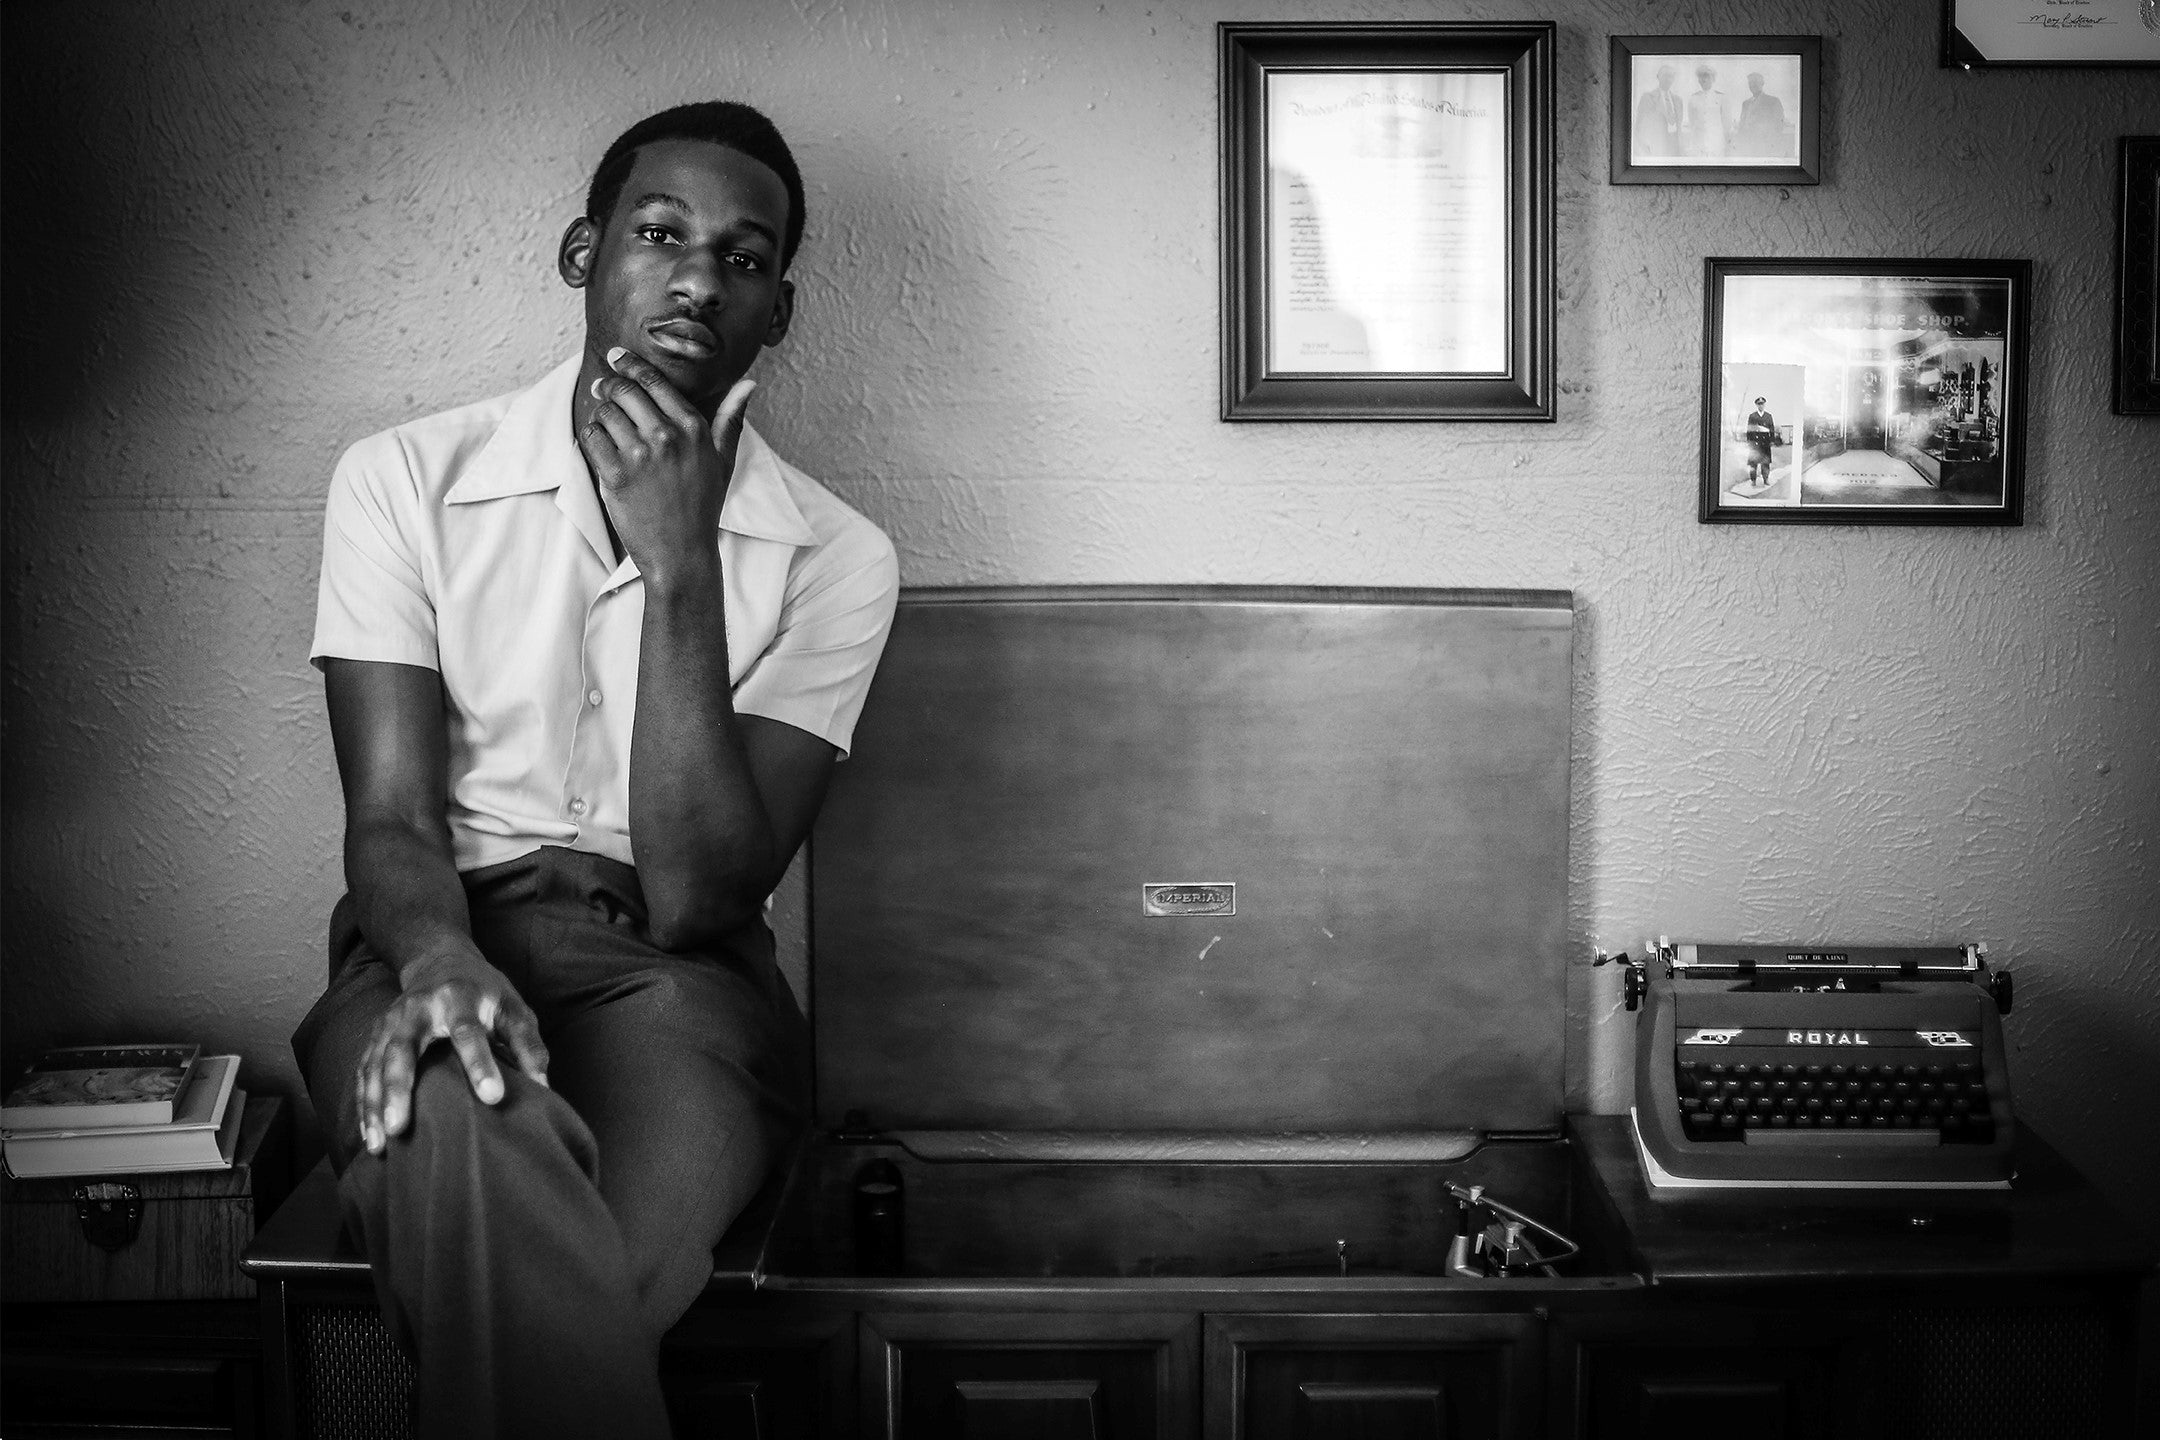 The Walls at Record Town - Links with Leon Bridges